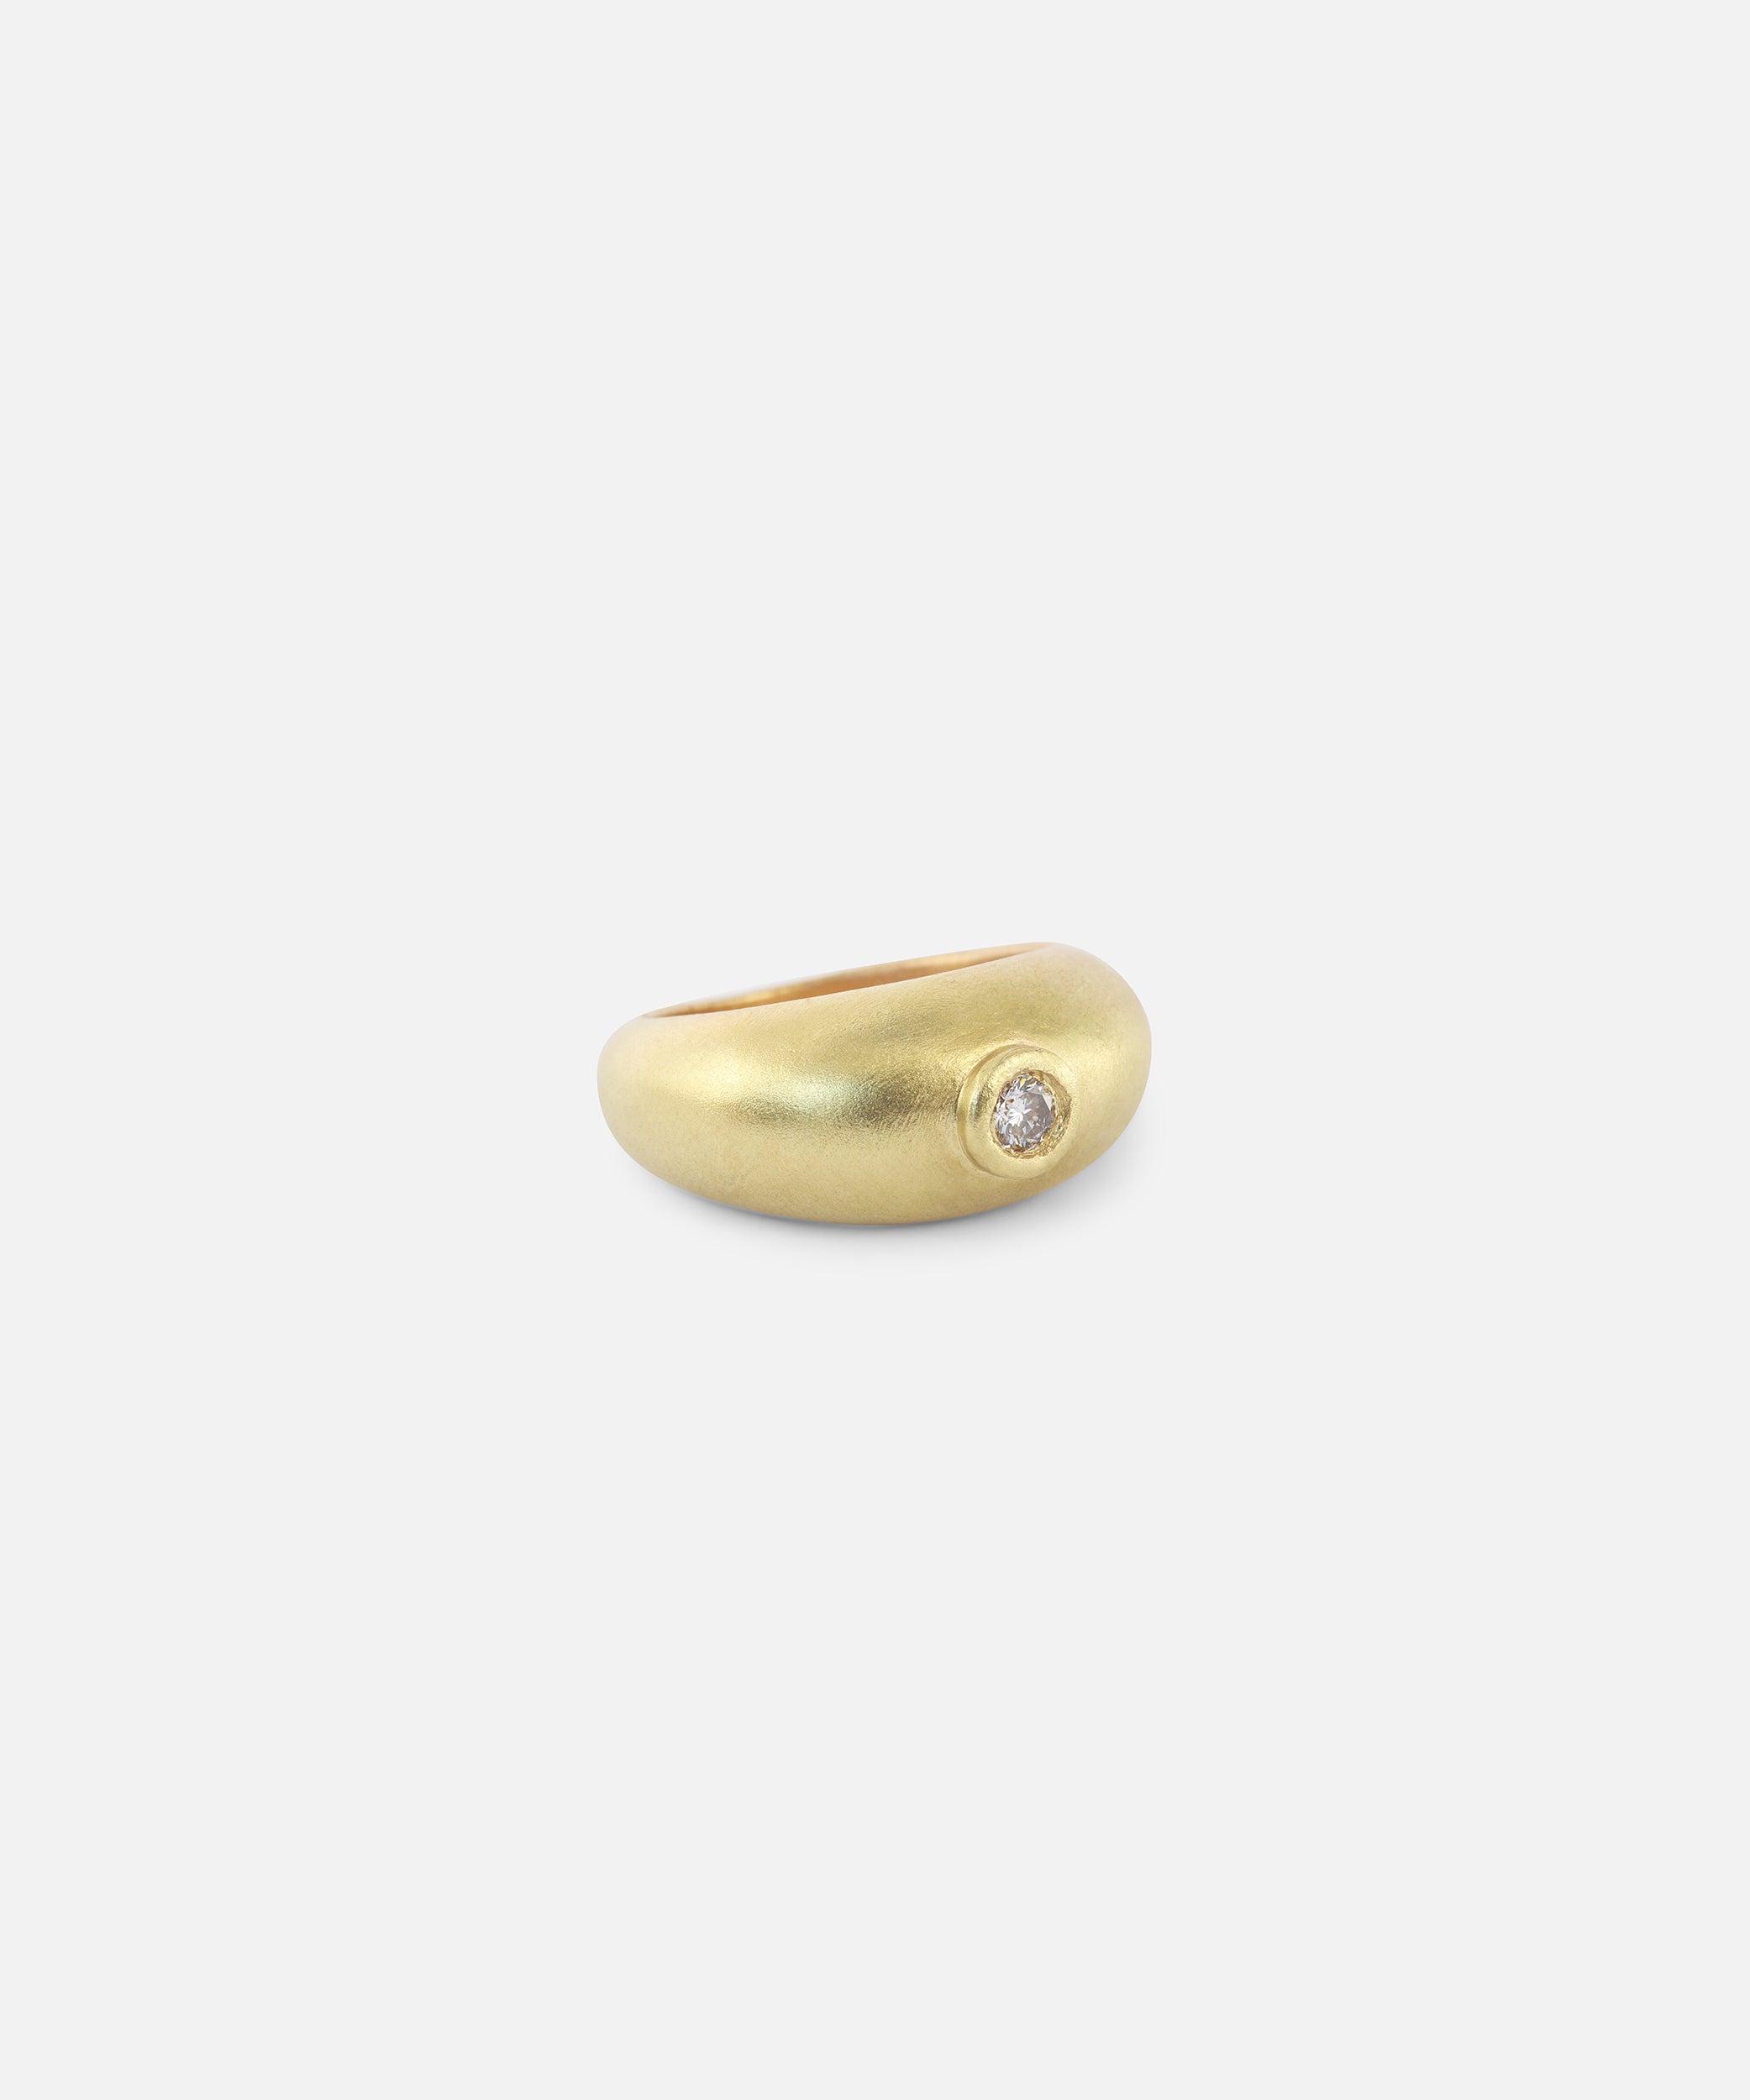 Gold Dome Ring with Diamond By Bree Altman